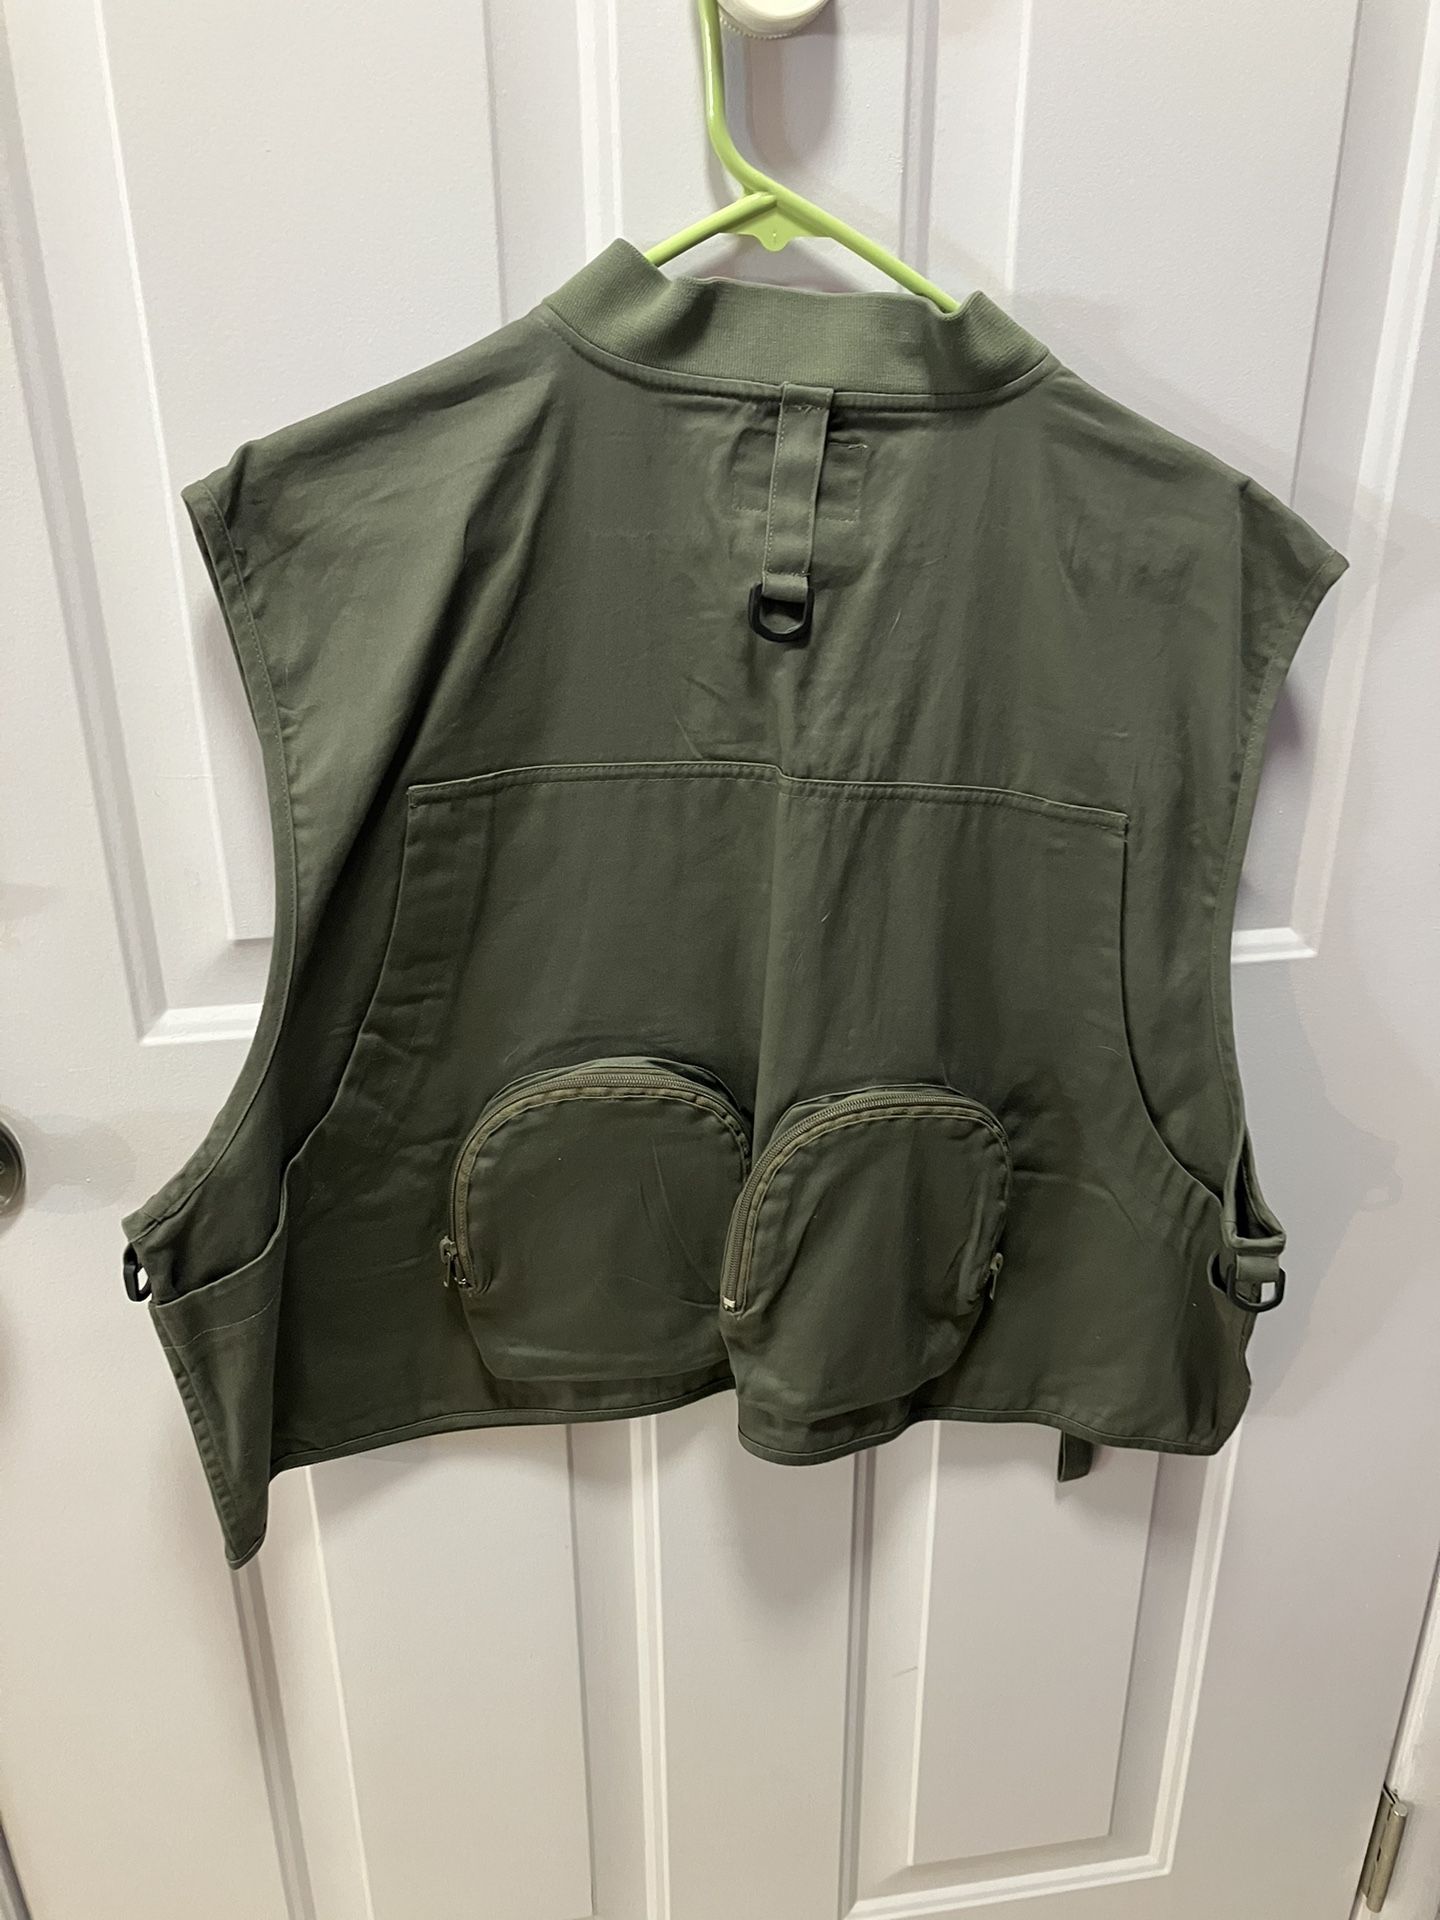 Ausable Fishing Vest & Icehouse Fish Creel for Sale in Las Vegas